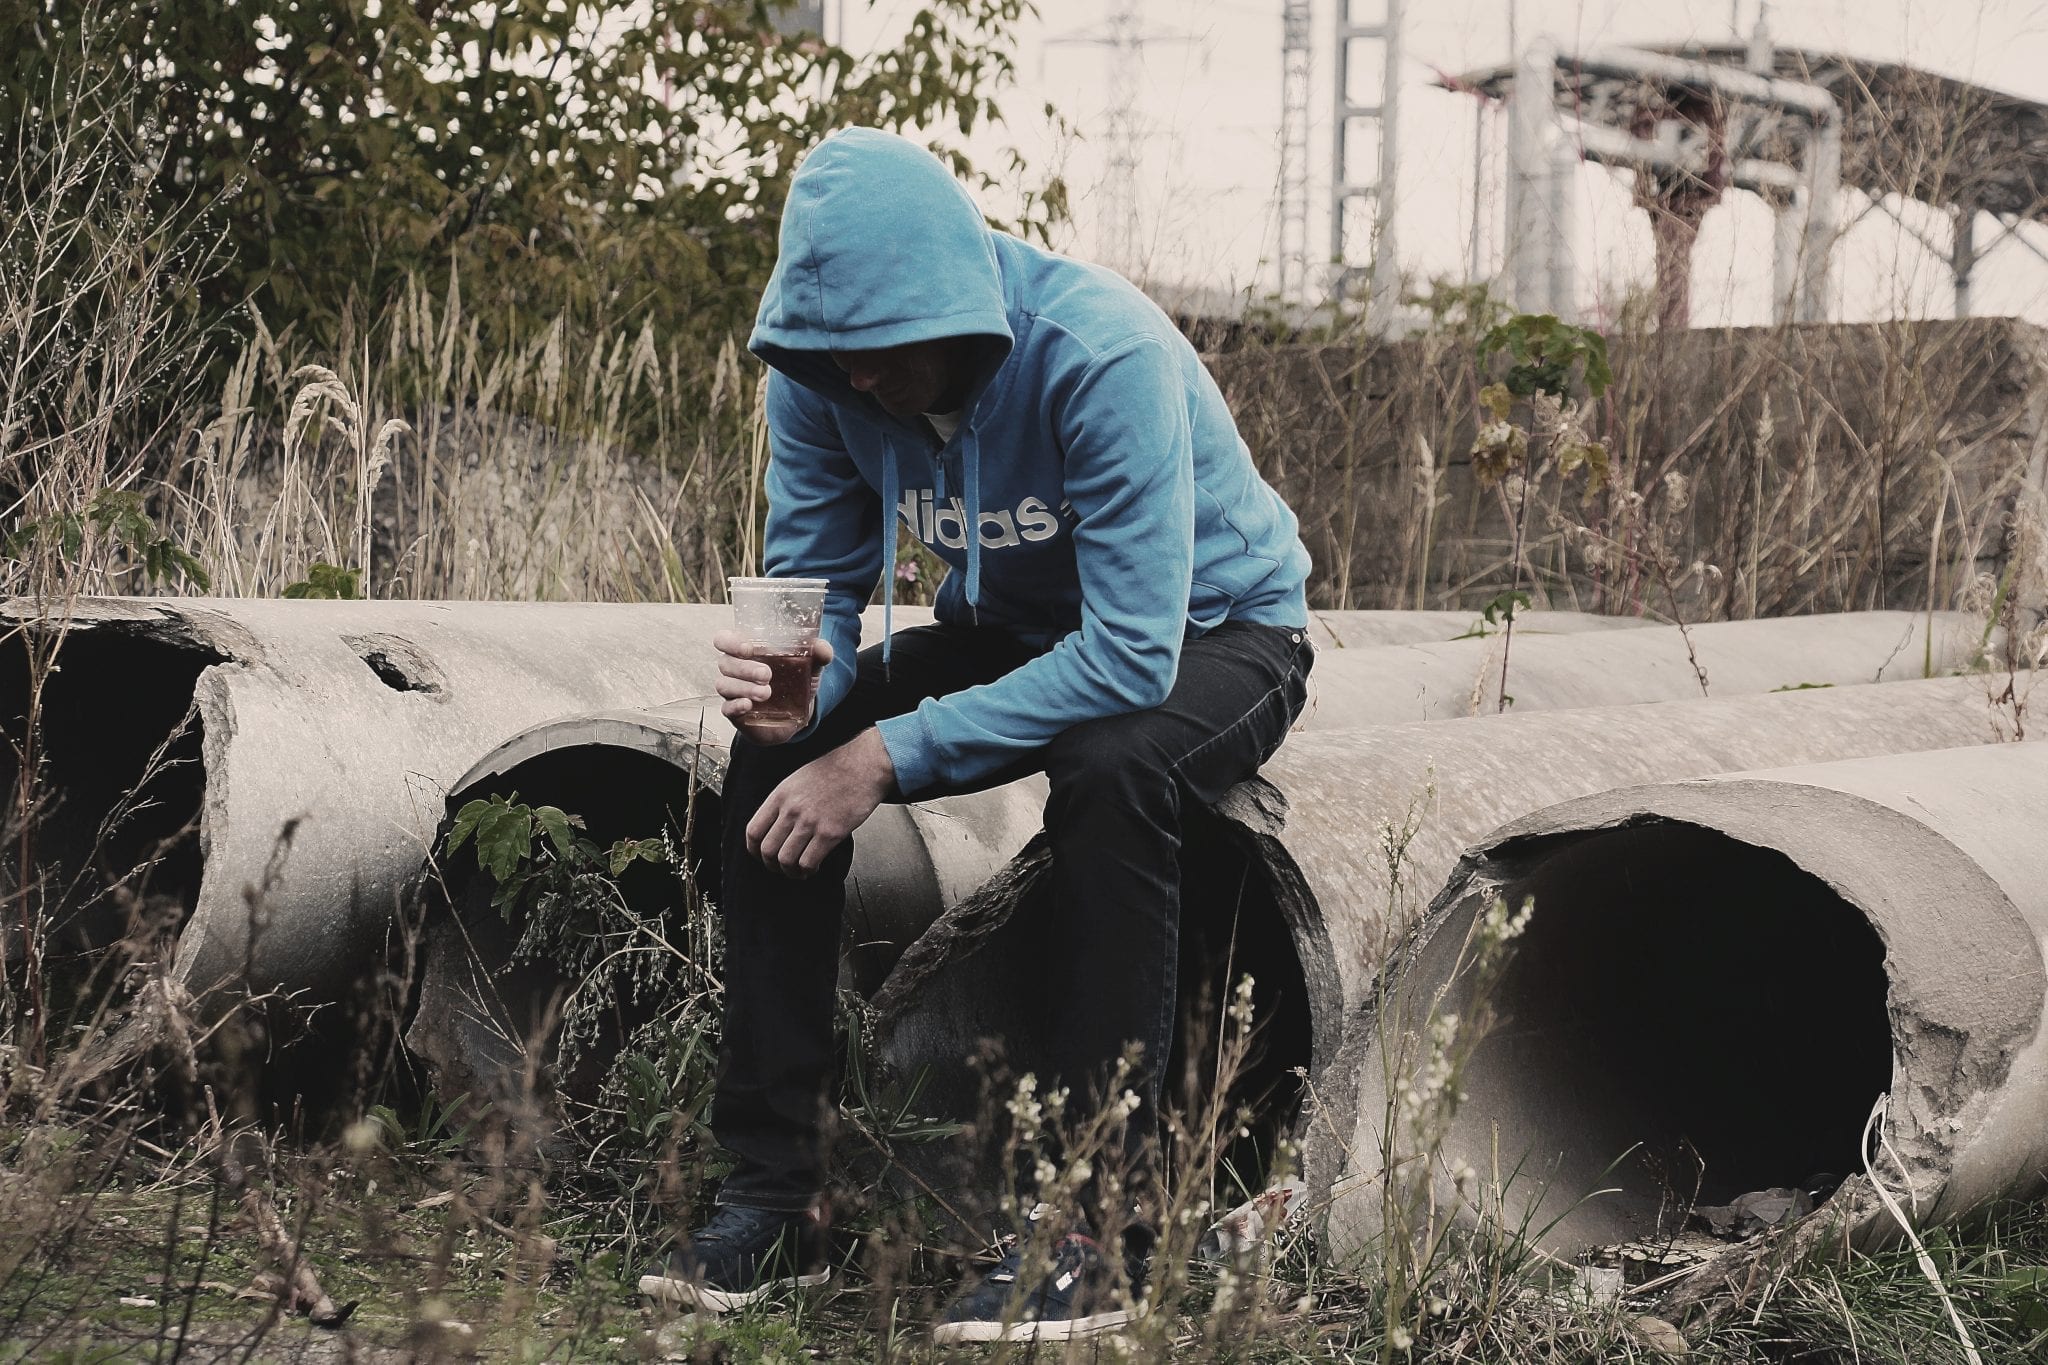 Man sitting alone in abandoned area; image via Pxhere, CC0.